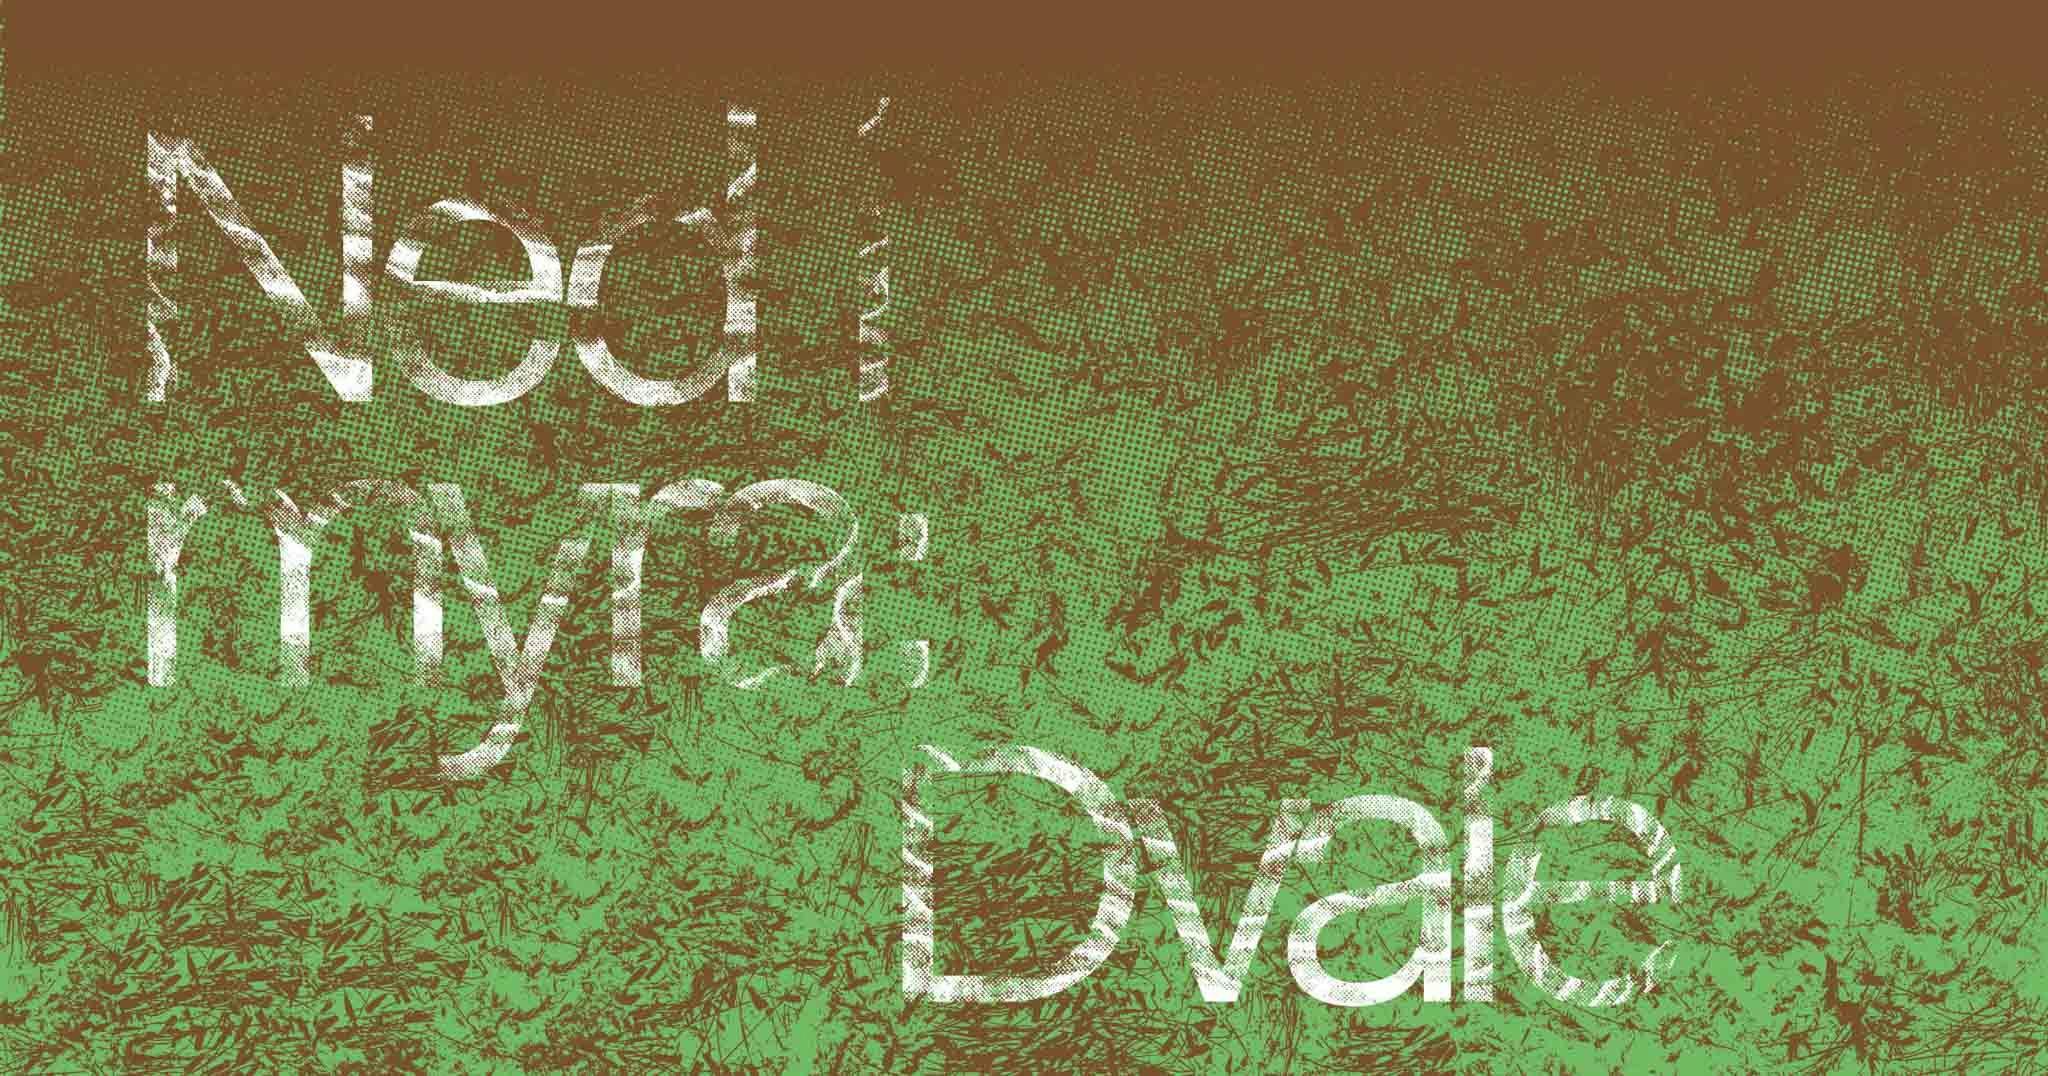 Green and brown abstract background with the text 'Ned i myra: Dvale' in white on top.